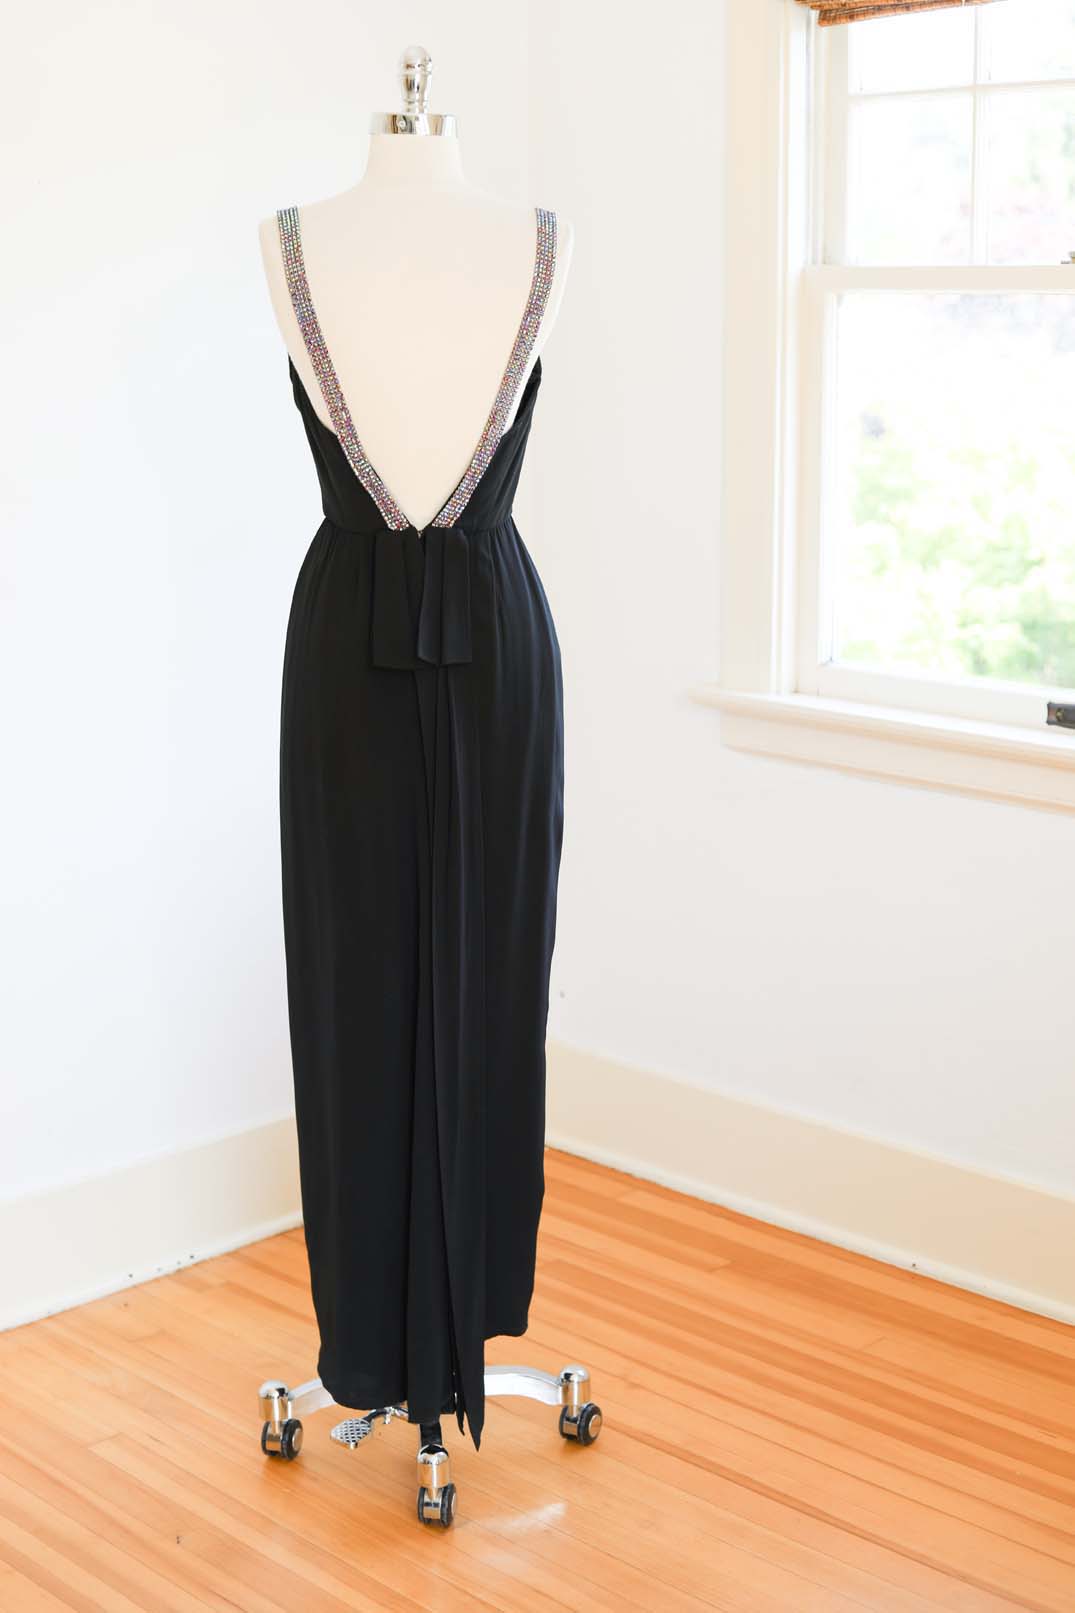 Vintage 1950s Dress - TOTAL BOMBSHELL Draped Designer Edward Abbot Gown w AB "Ruby" Rhinestone Straps Size XS to S